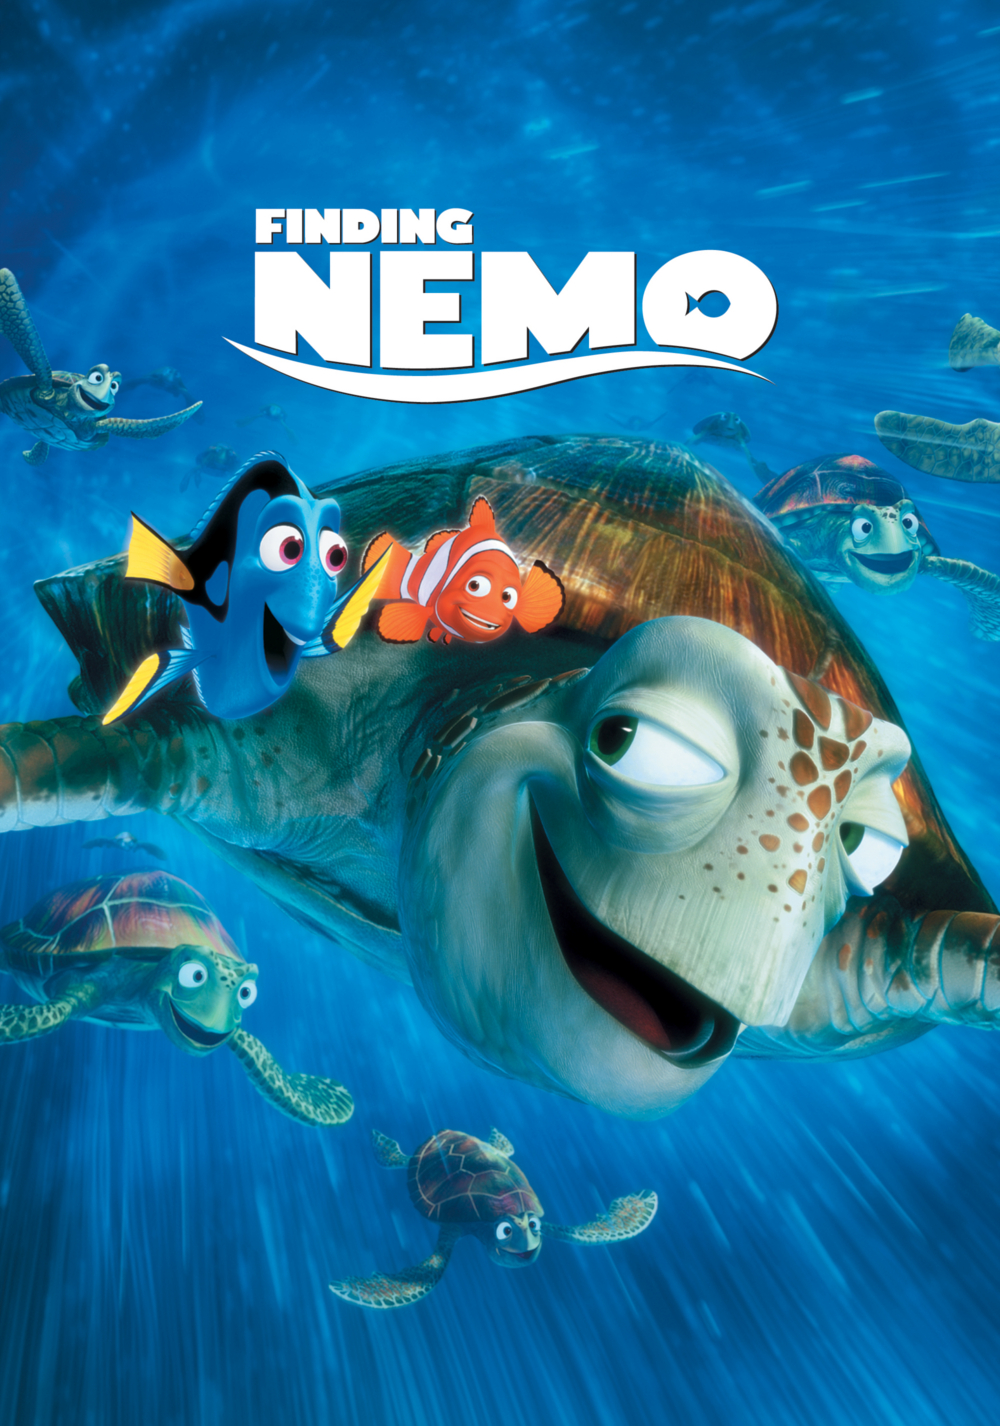  Finding  Nemo  Movie  Poster ID 92199 Image Abyss